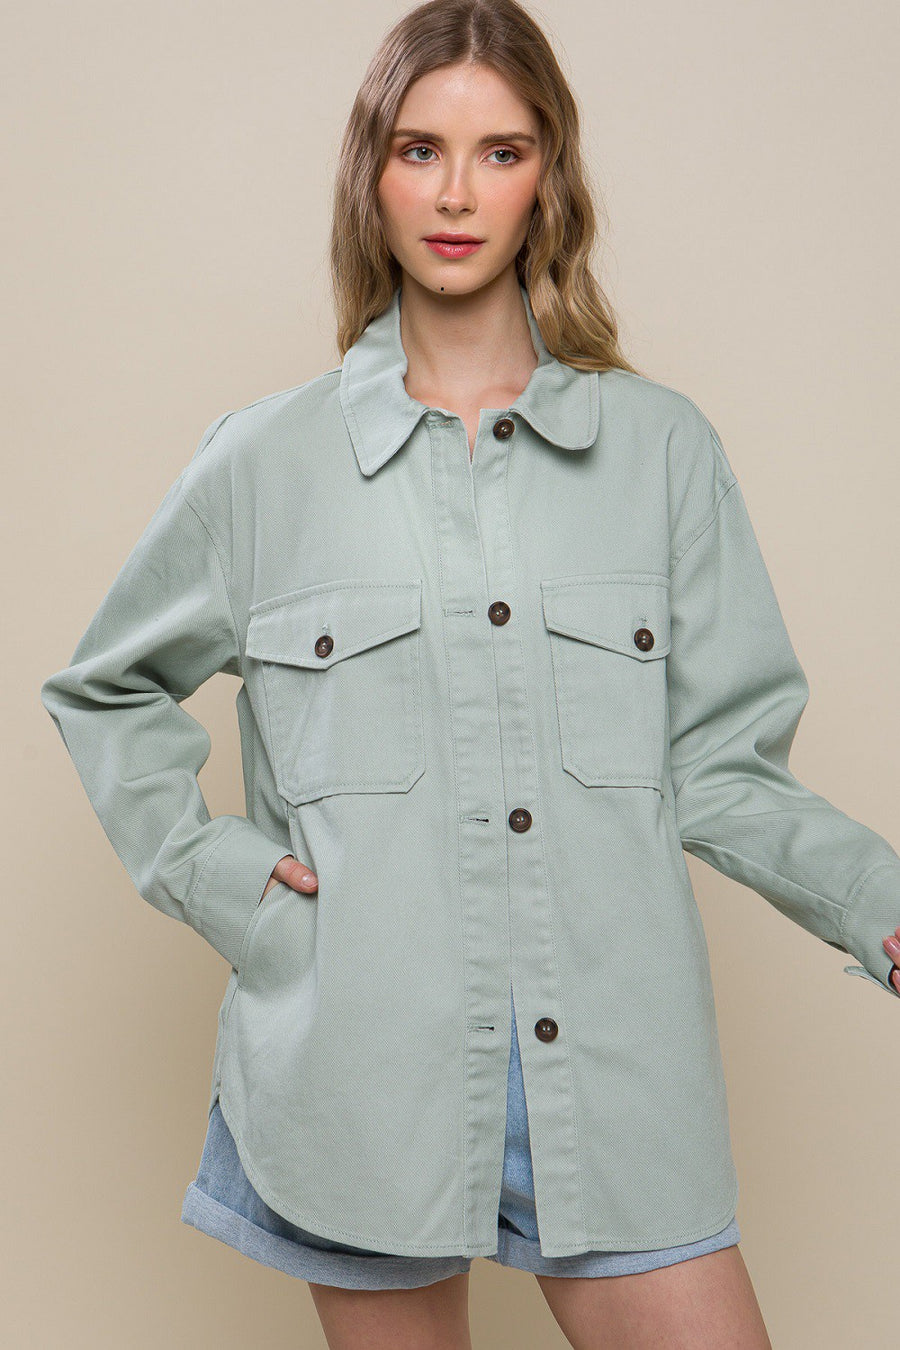 Oversized denim jacket in the color moss.